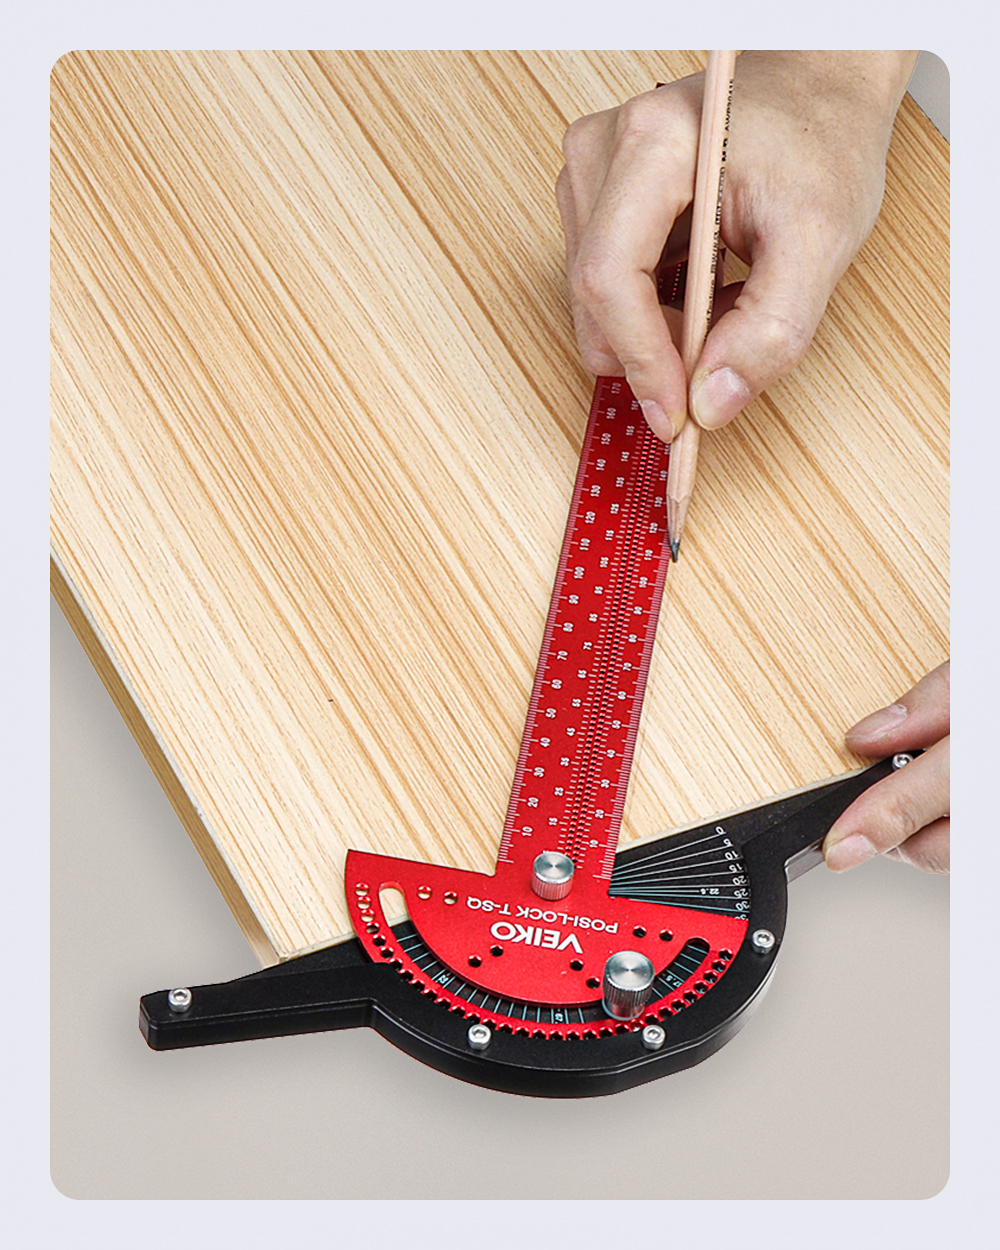 VEIKO-Aluminum-Alloy-300mm-Angle-Positioning-T-Square-Posi-Lock-Ruler-Woodworking-Edge-Ruler-Angle-M-1907927-8